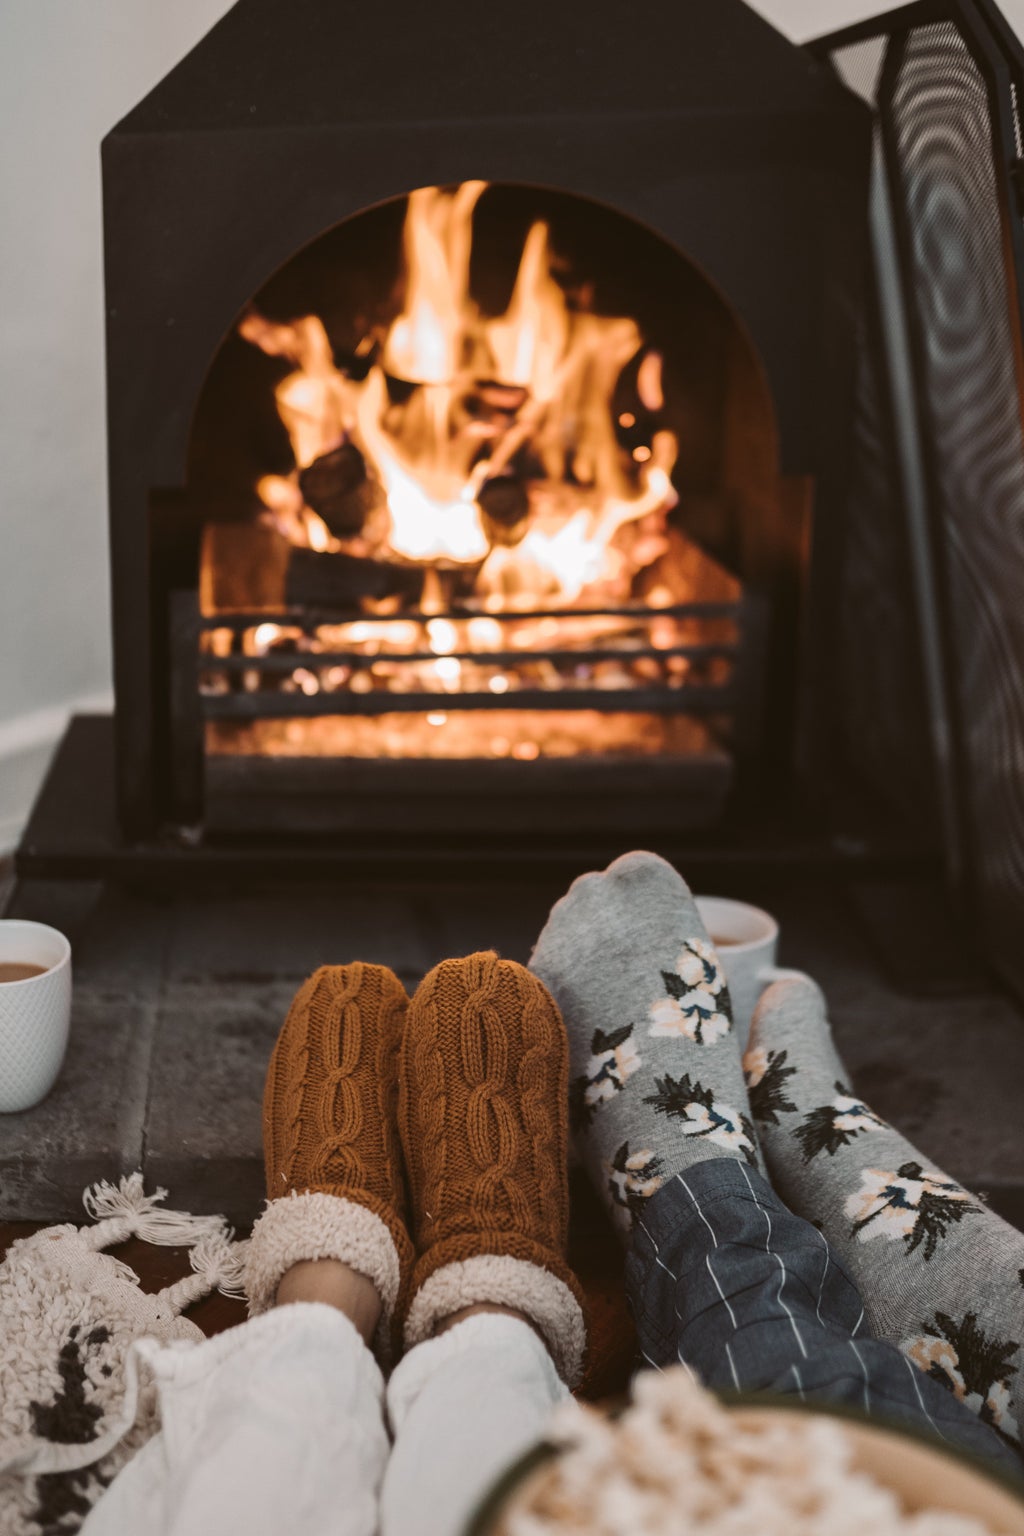 Person Wearing Gray and White Socks Near Brown Fireplace